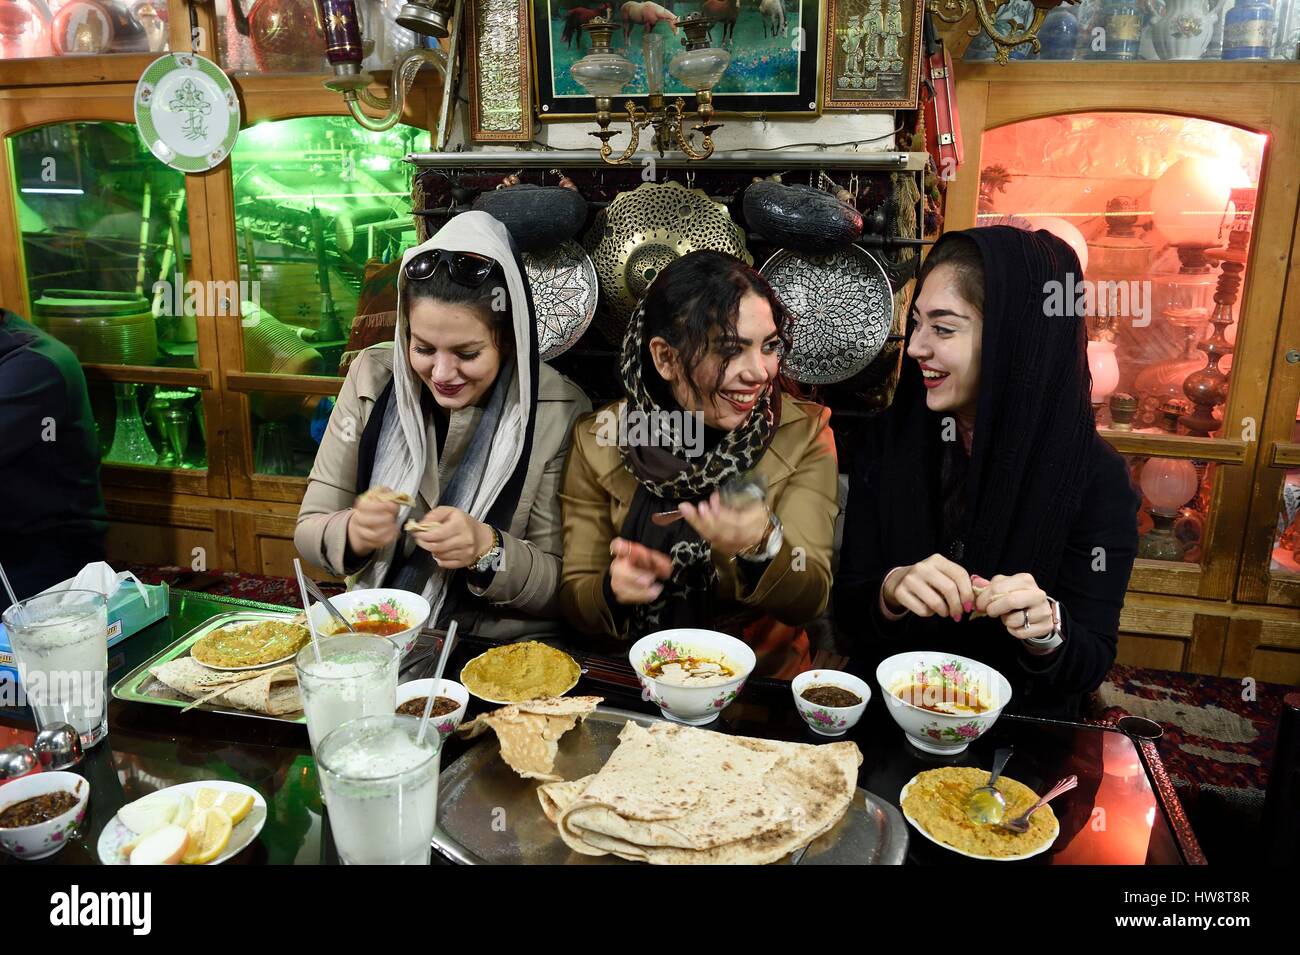 Iran, Isfahan Province, Isfahan, Chai Khaneh Azadegan Tea House and restaurant, young iranian women student in medical engineering whose name are, from left to right, Pita, Nadia and Niloufar (no model release) Stock Photo